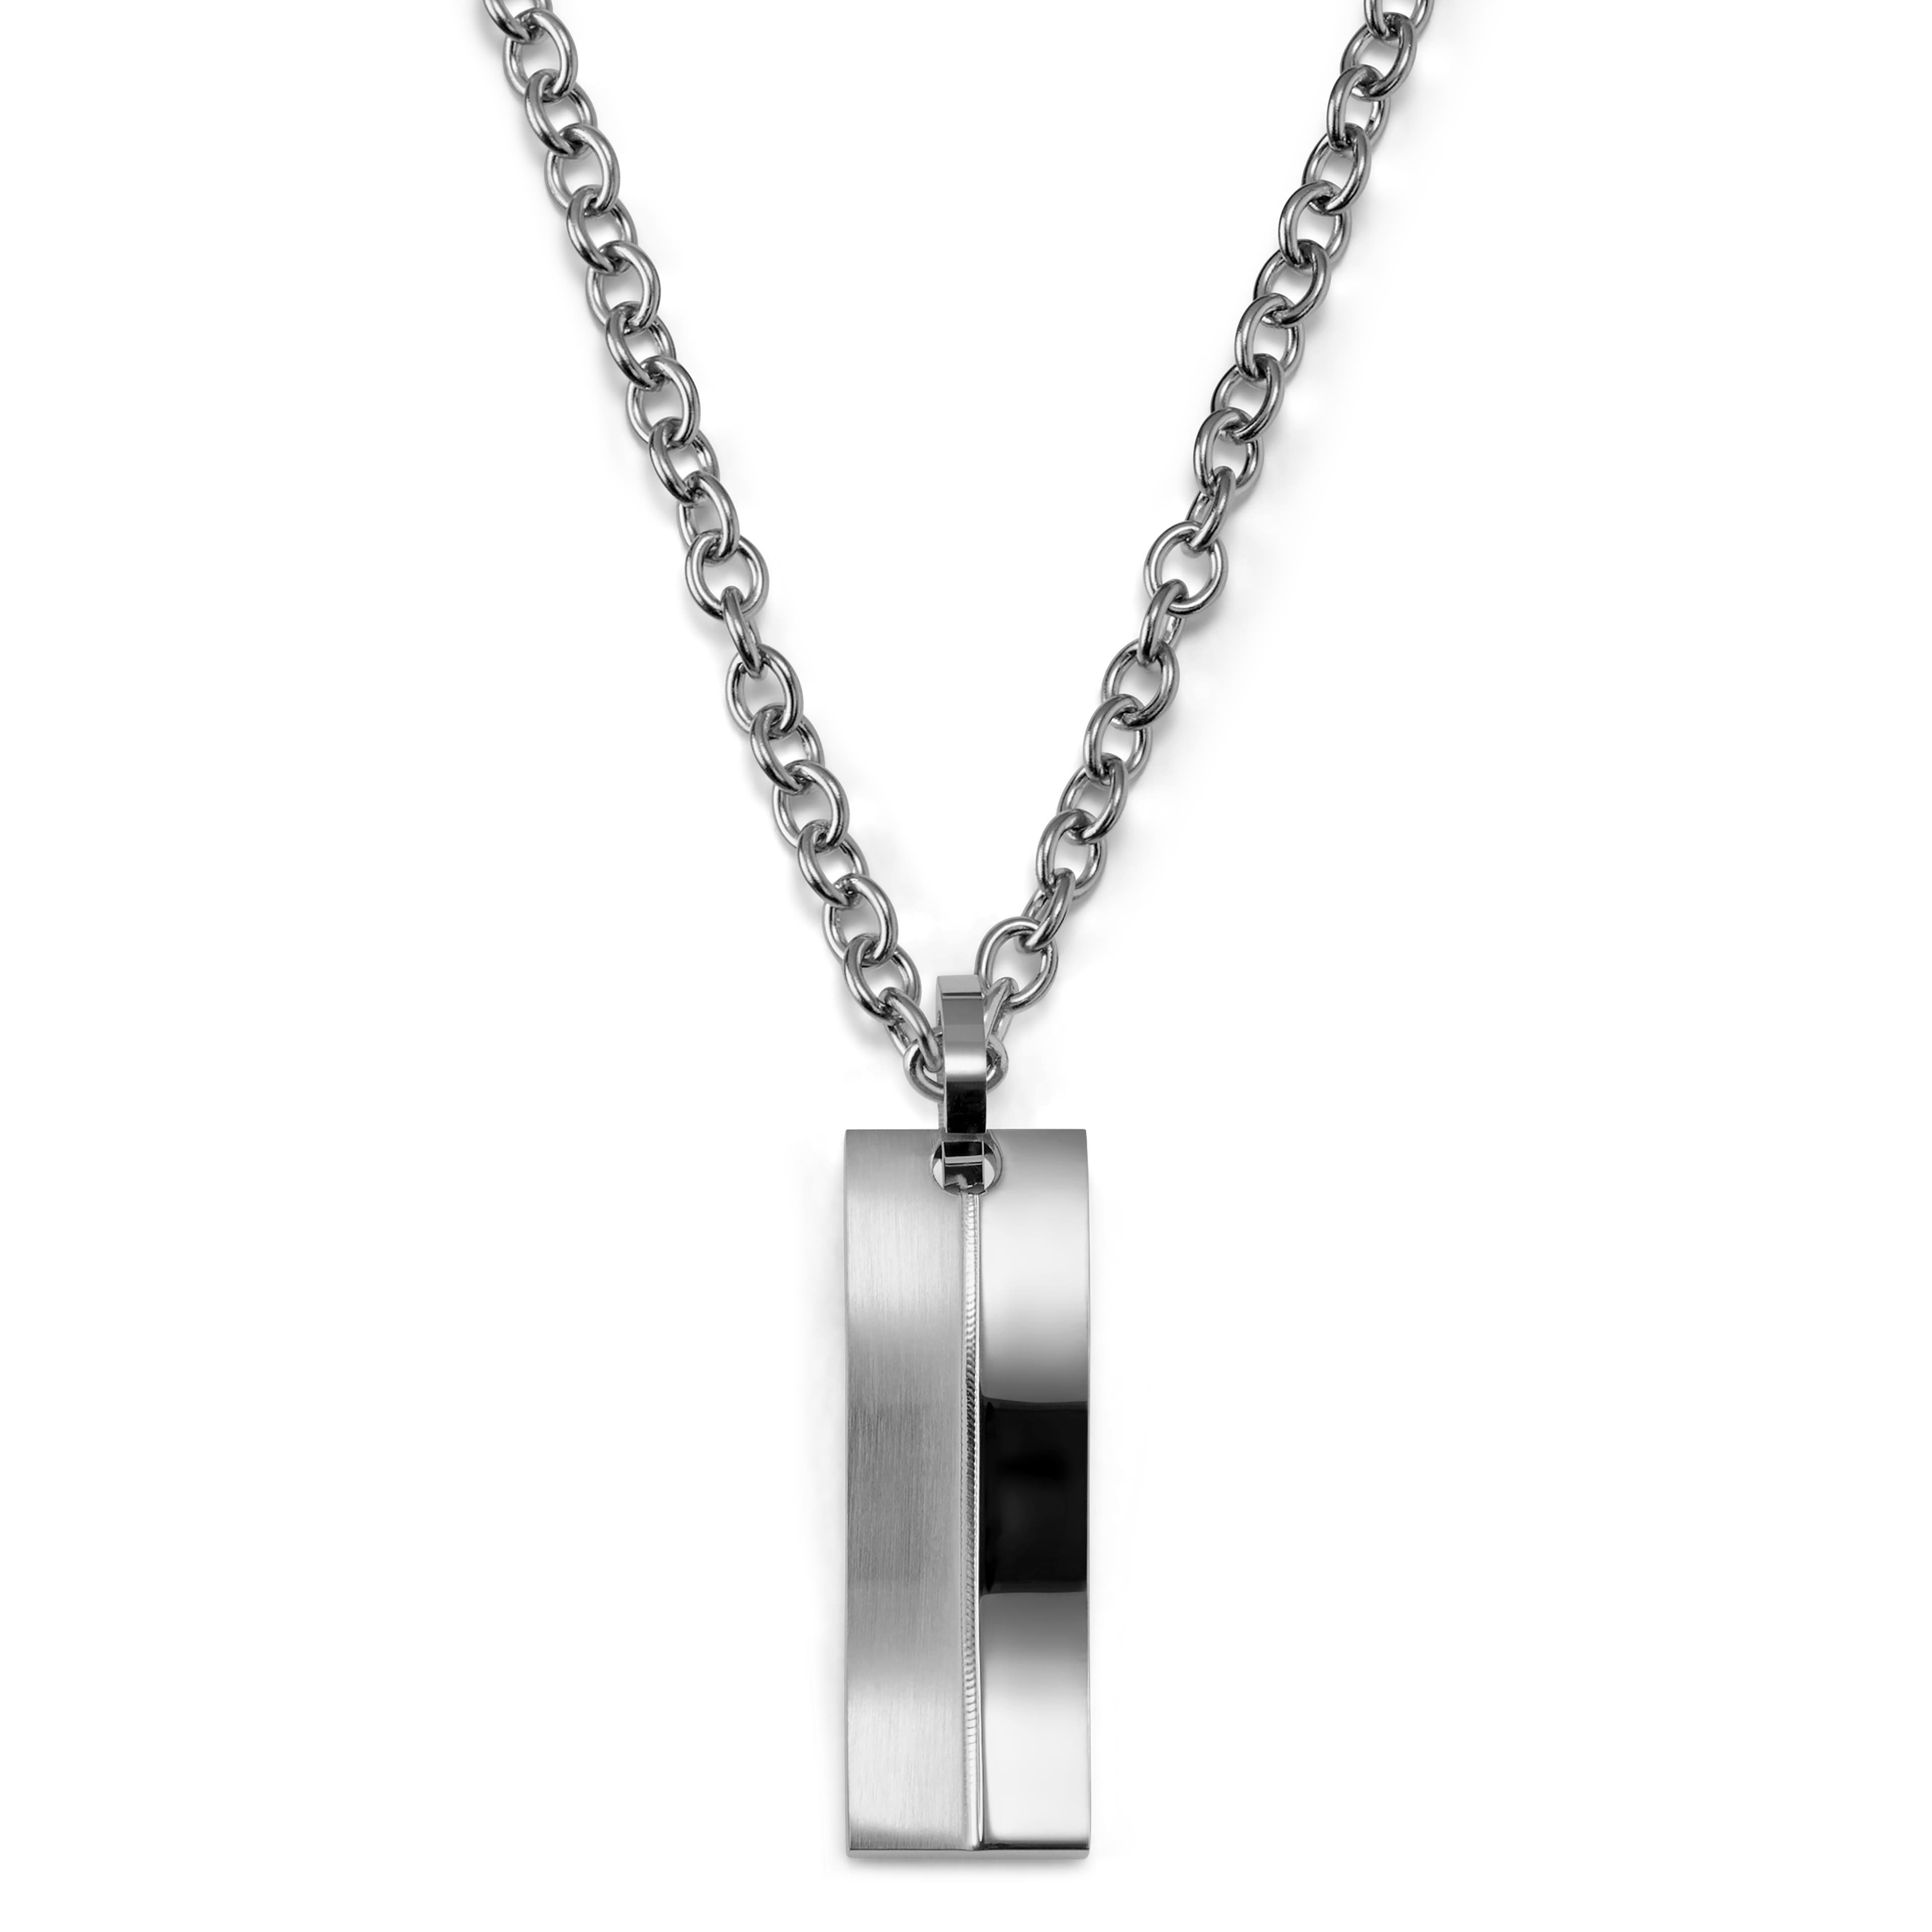 Stylish Silver-Tone Steel Necklace